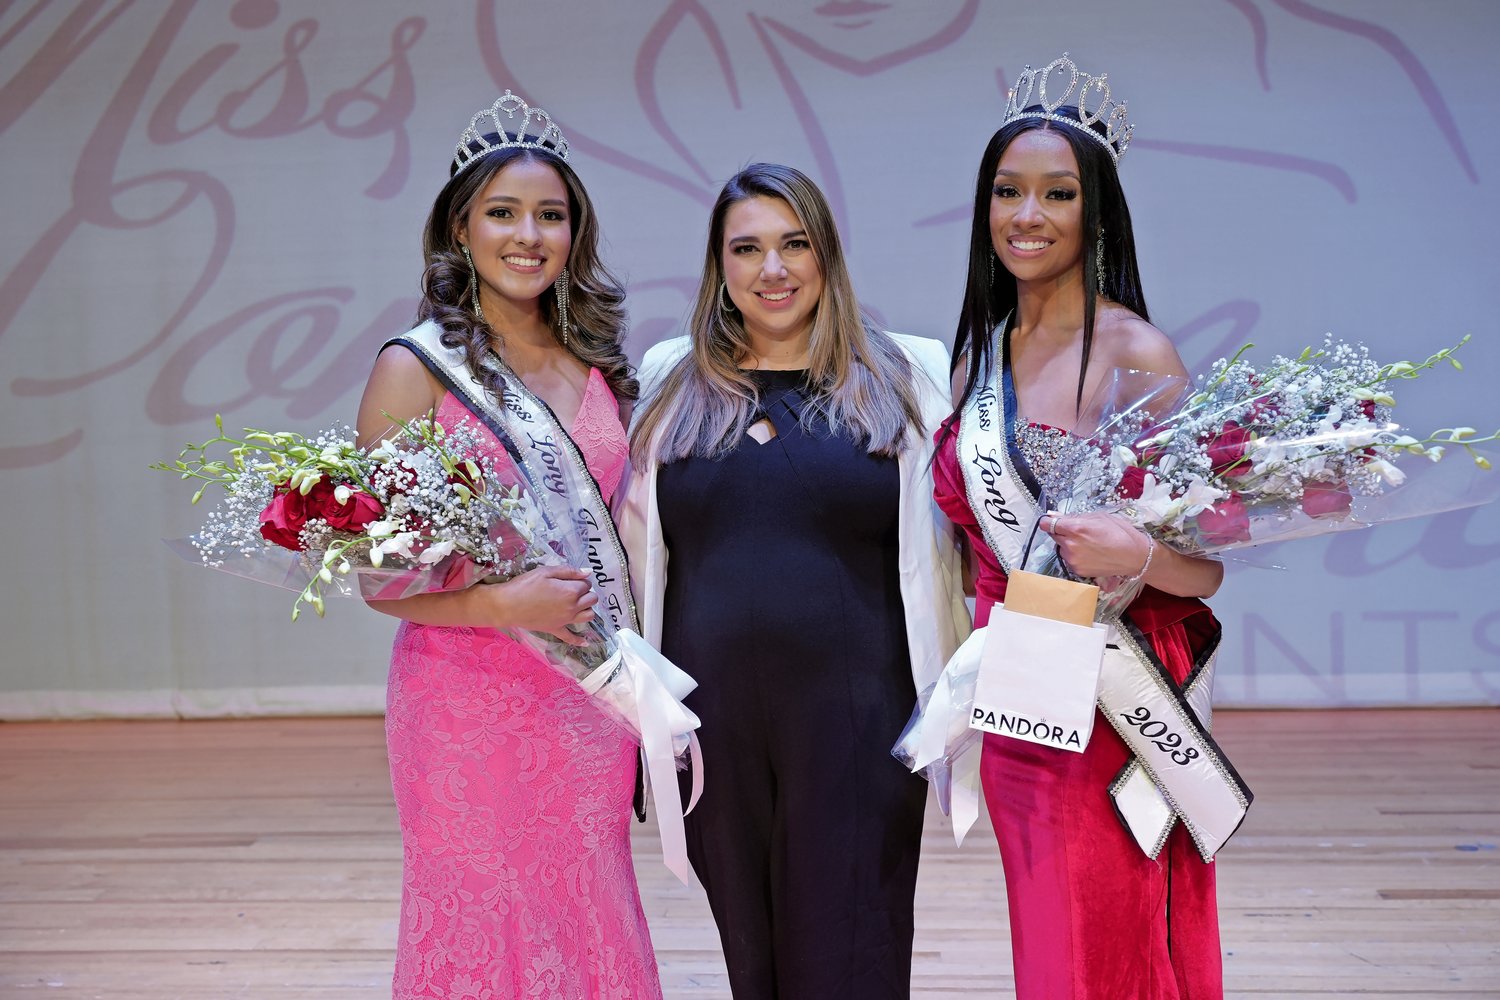 Miss Long Island Teen 2023 Natalia Suaza, from Valley Stream, joined by Miss Long Island Pageants executive director Leanne Baum, and Miss Long Island 2023 Lianne Webb, from Baldwin.